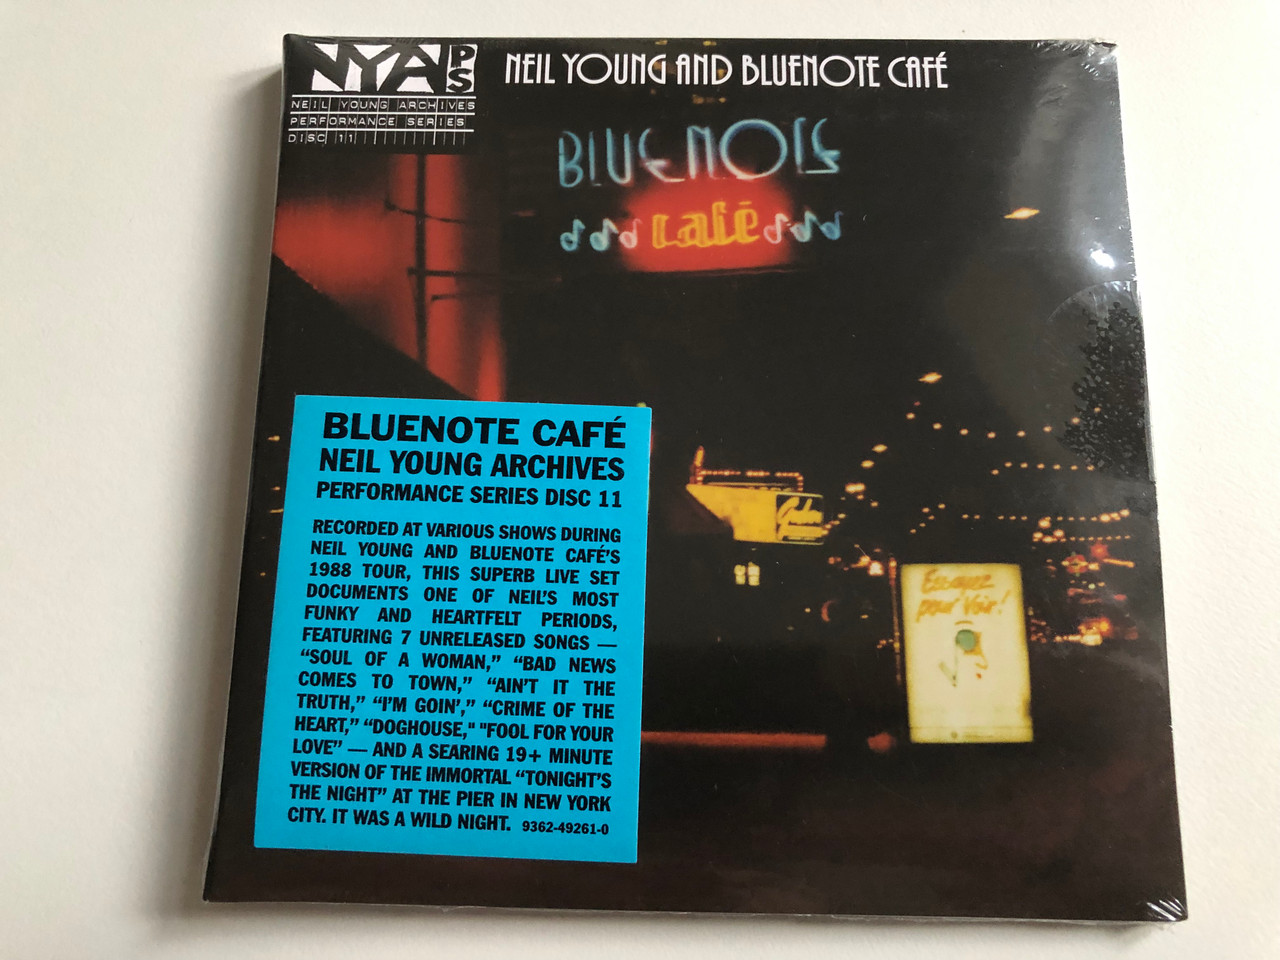 Neil Young And Bluenote Café – Bluenote Café / Neil Young Archives  Performance Series – Disc 11 / Reprise Records 2x Audio CD 2015 /  9362-49261-0 - Bible in My Language